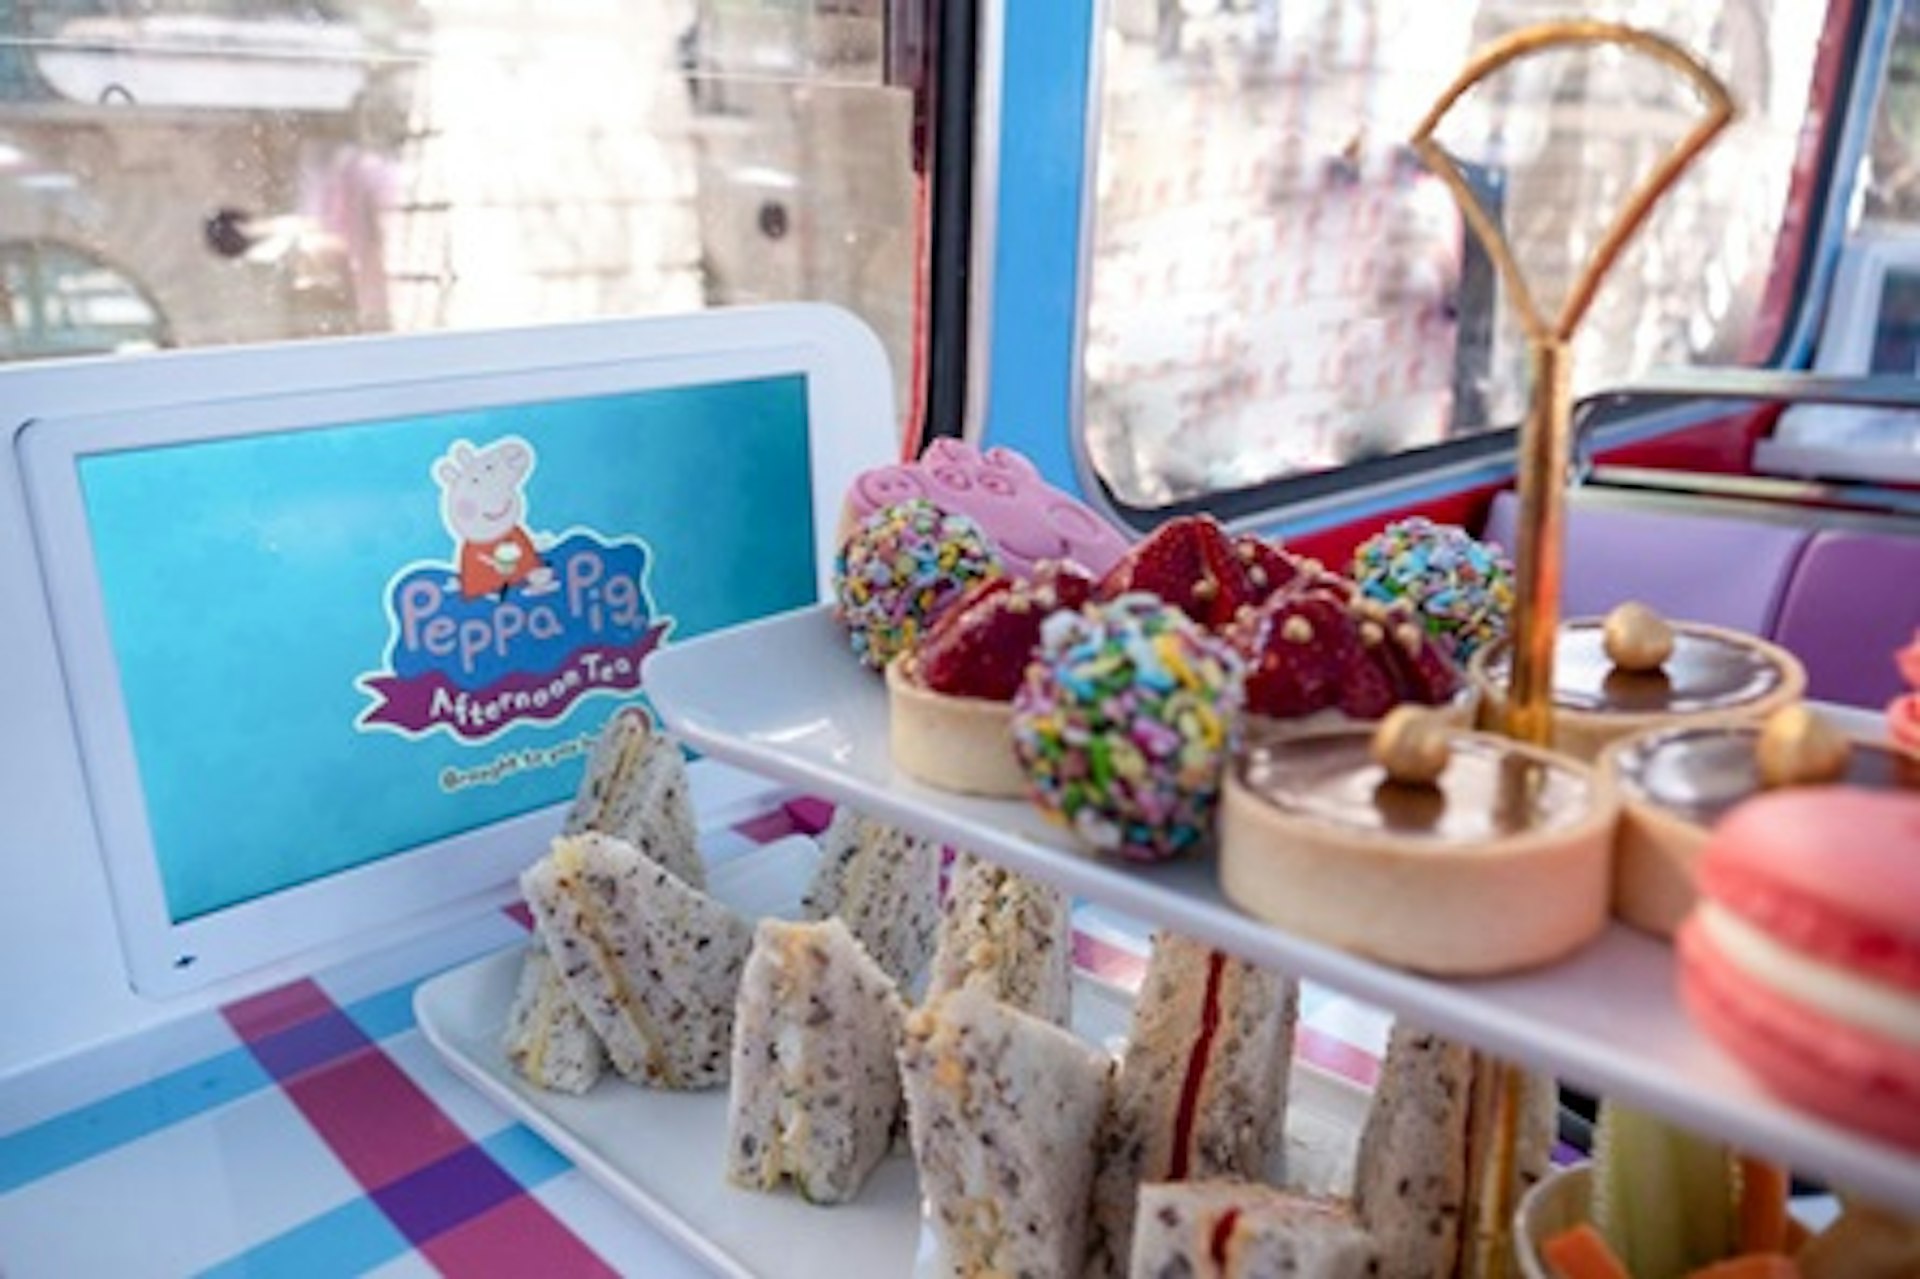 Peppa Pig Afternoon Tea Bus Tour for One Adult 3